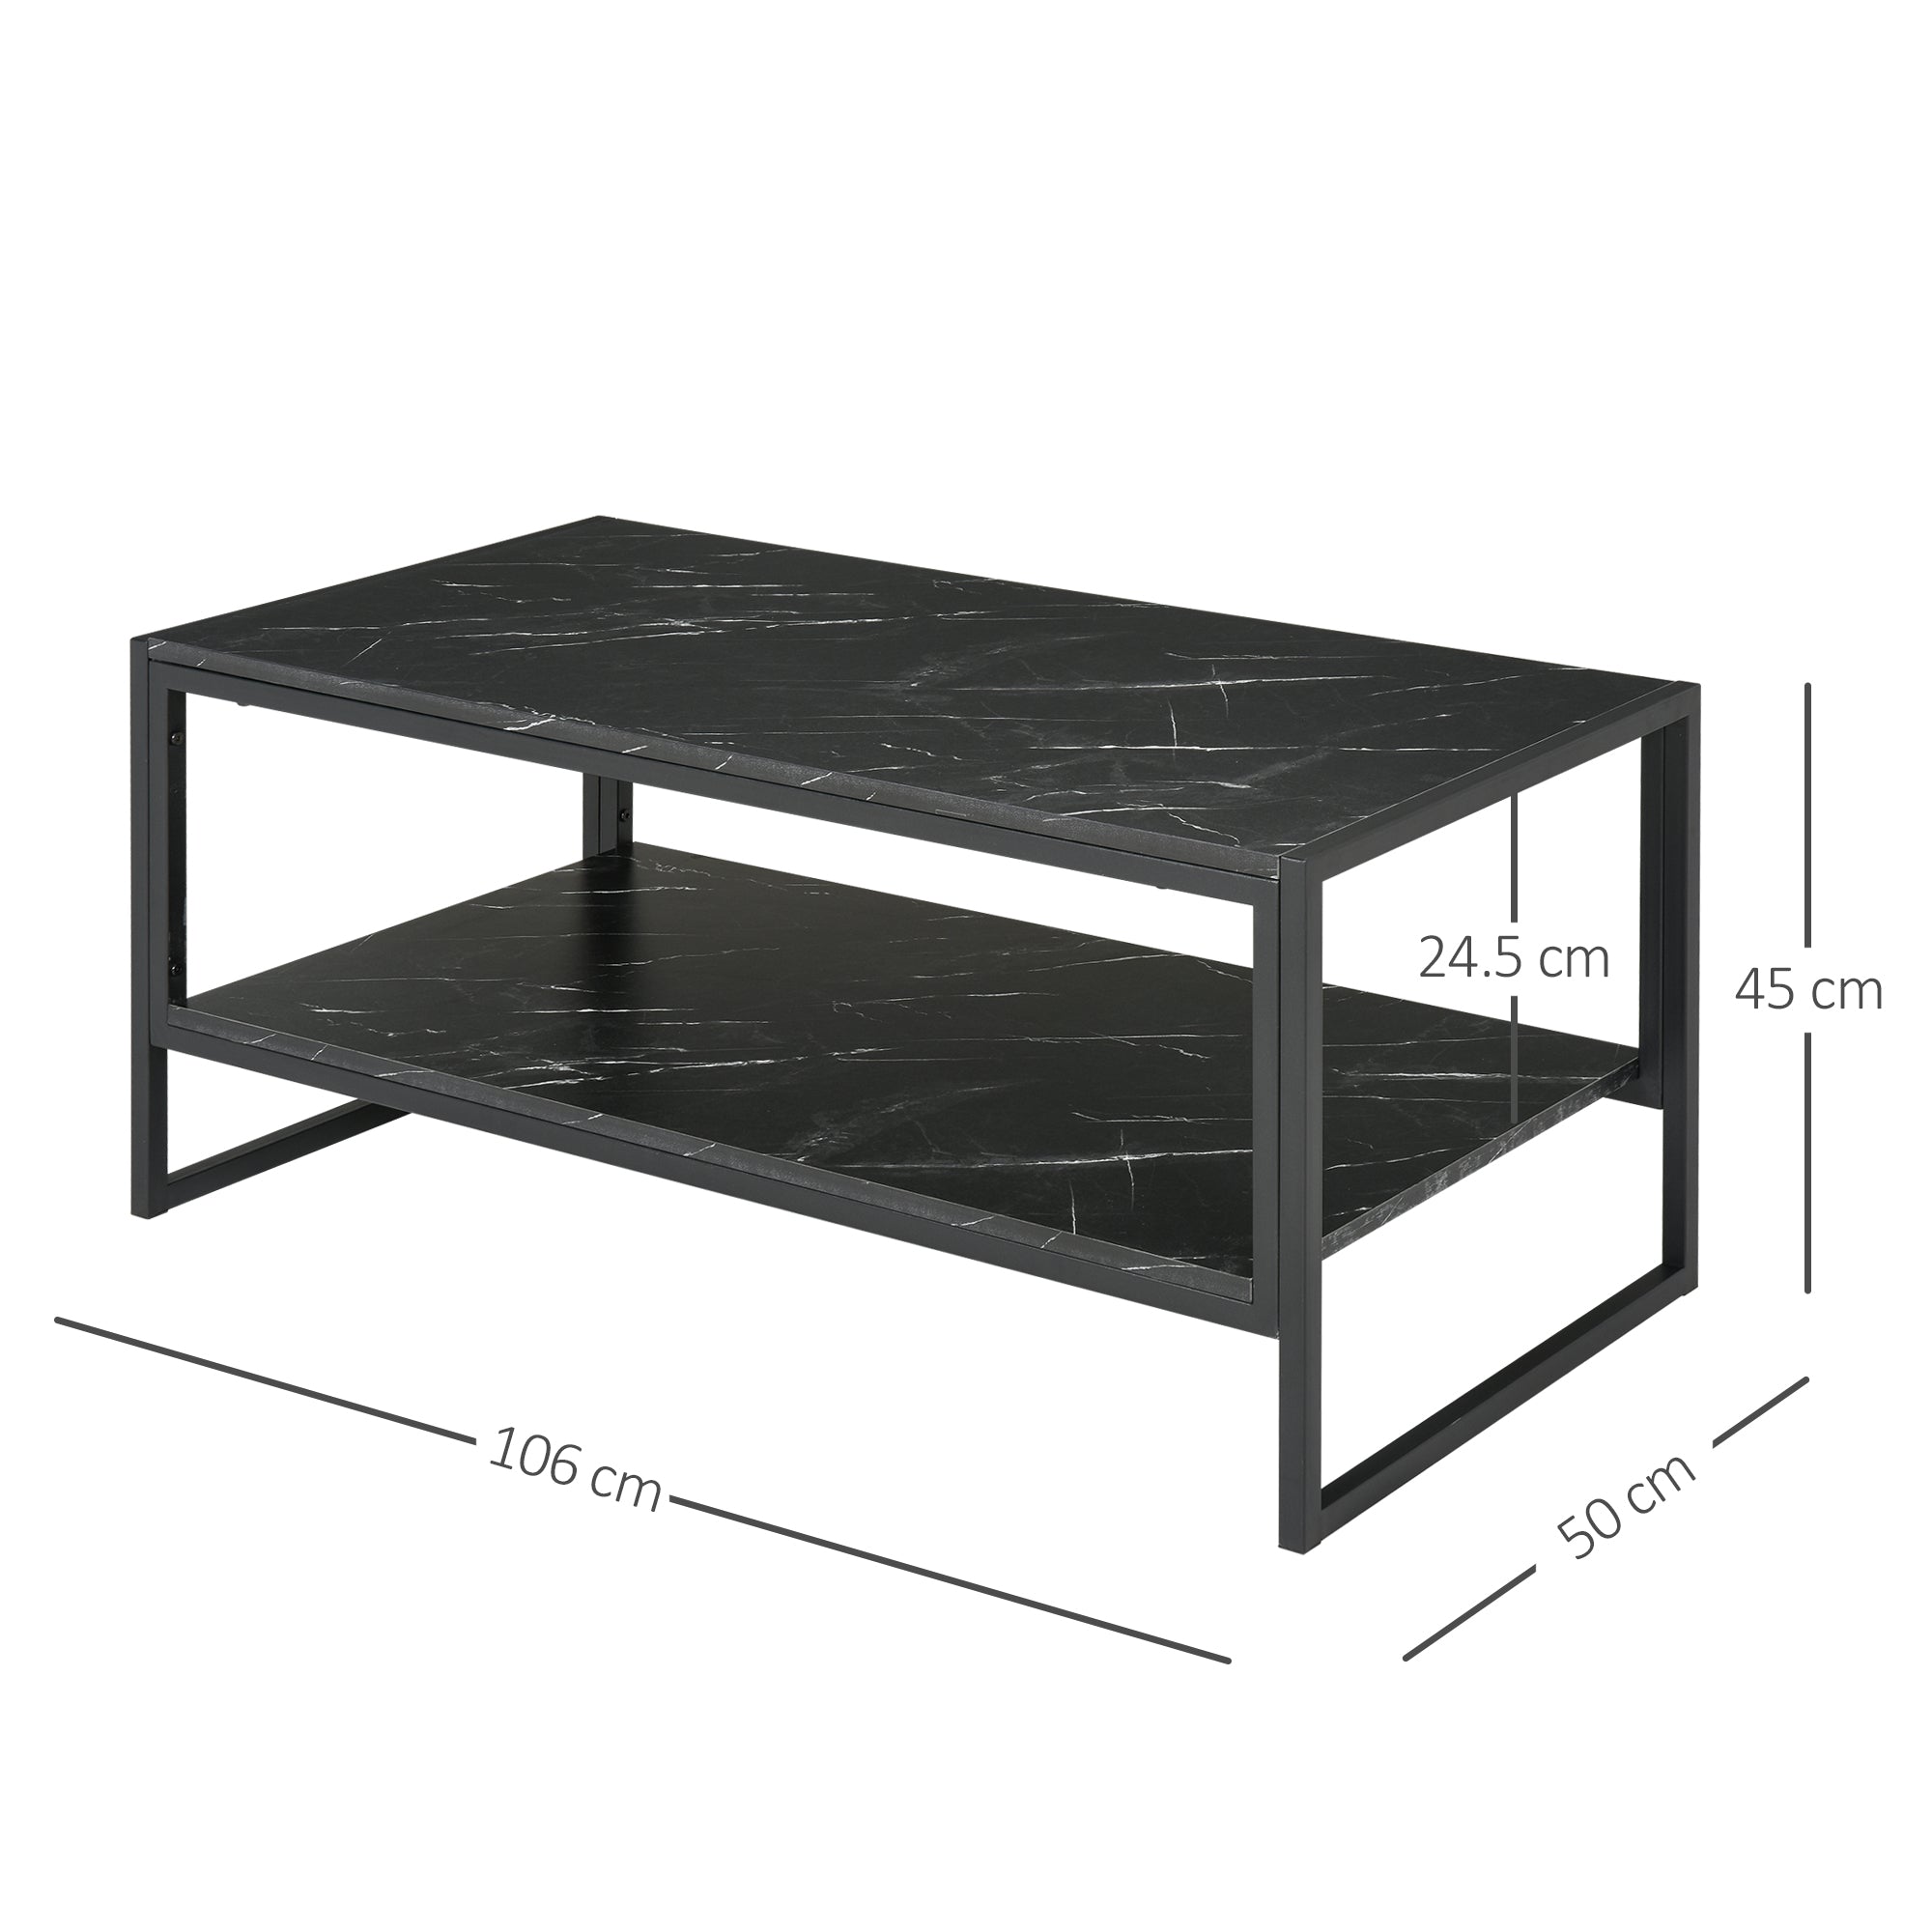 Two-Tier Laminate Marble Print Table Top Coffee Table w/ Metal Frame Foot Pads Elegant Modern Style 2 Shelves Home Display Storage Unit Black-2